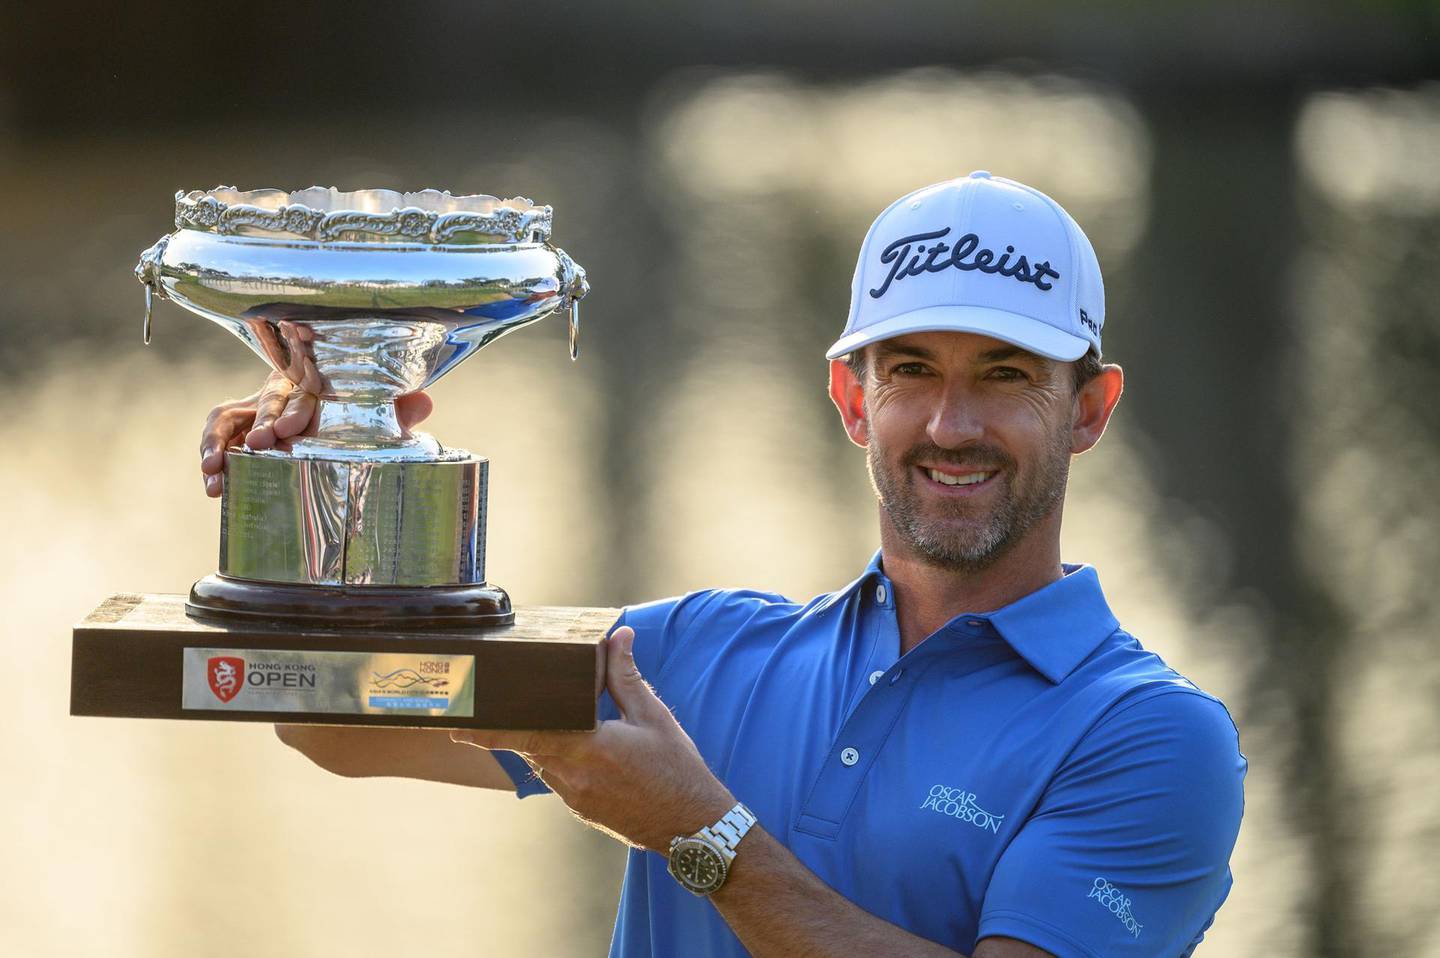 Australia's Wade Ormsby poses with the champion's trophy after winning in the final round of the Hong Kong Open golf tournament at the Hong Kong Golf Club on January 12, 2020. / AFP / Philip FONG
